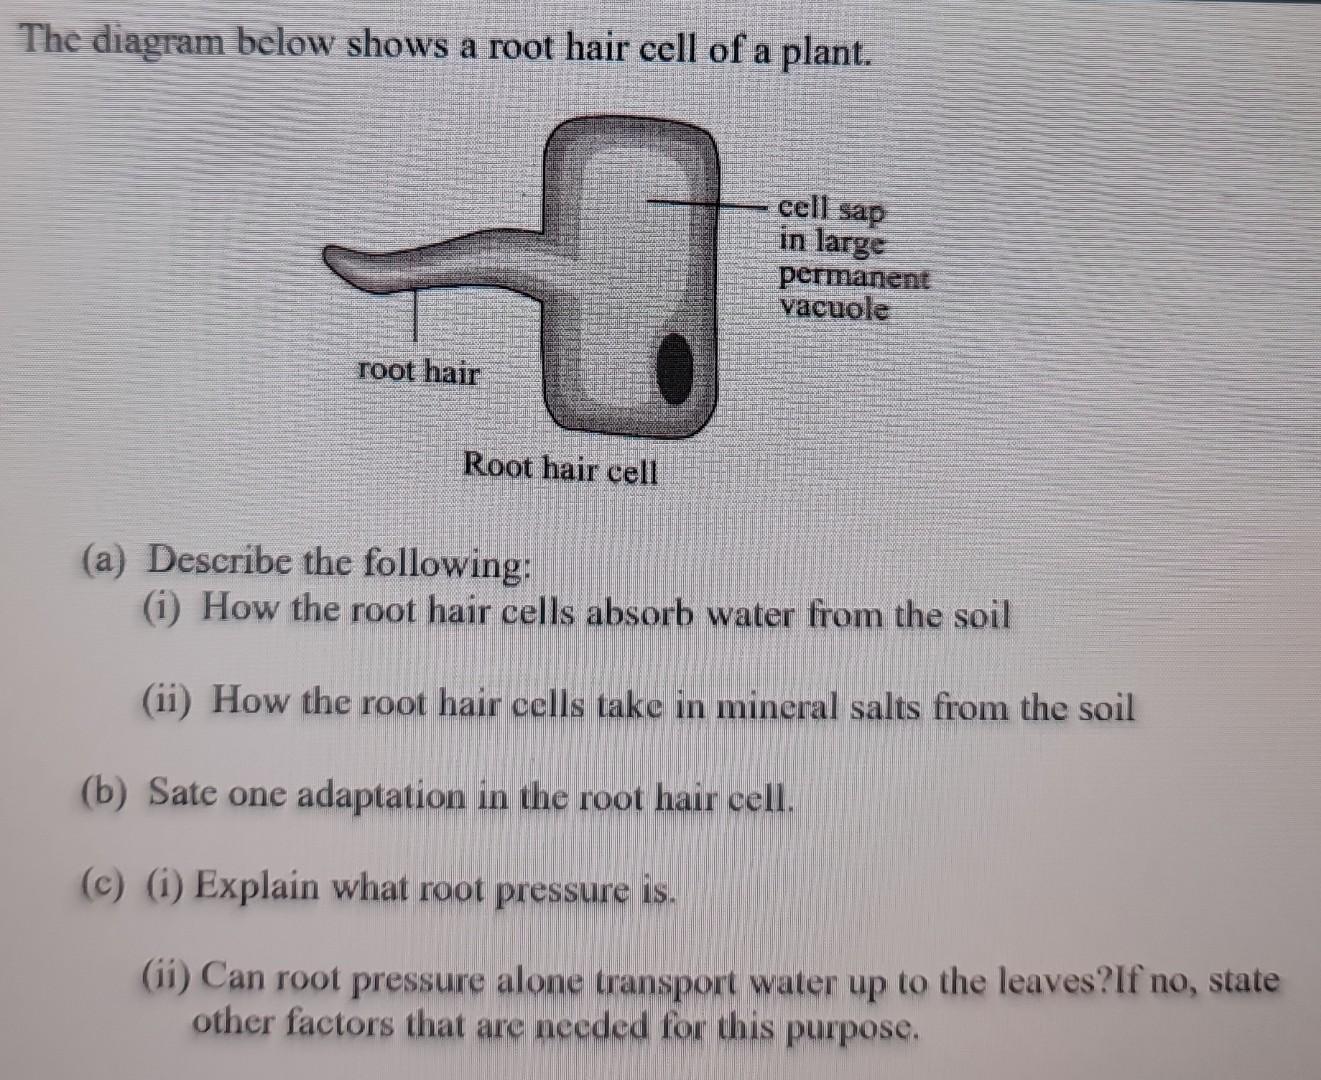 What would happen if cell sap of root hair cells contain high conc